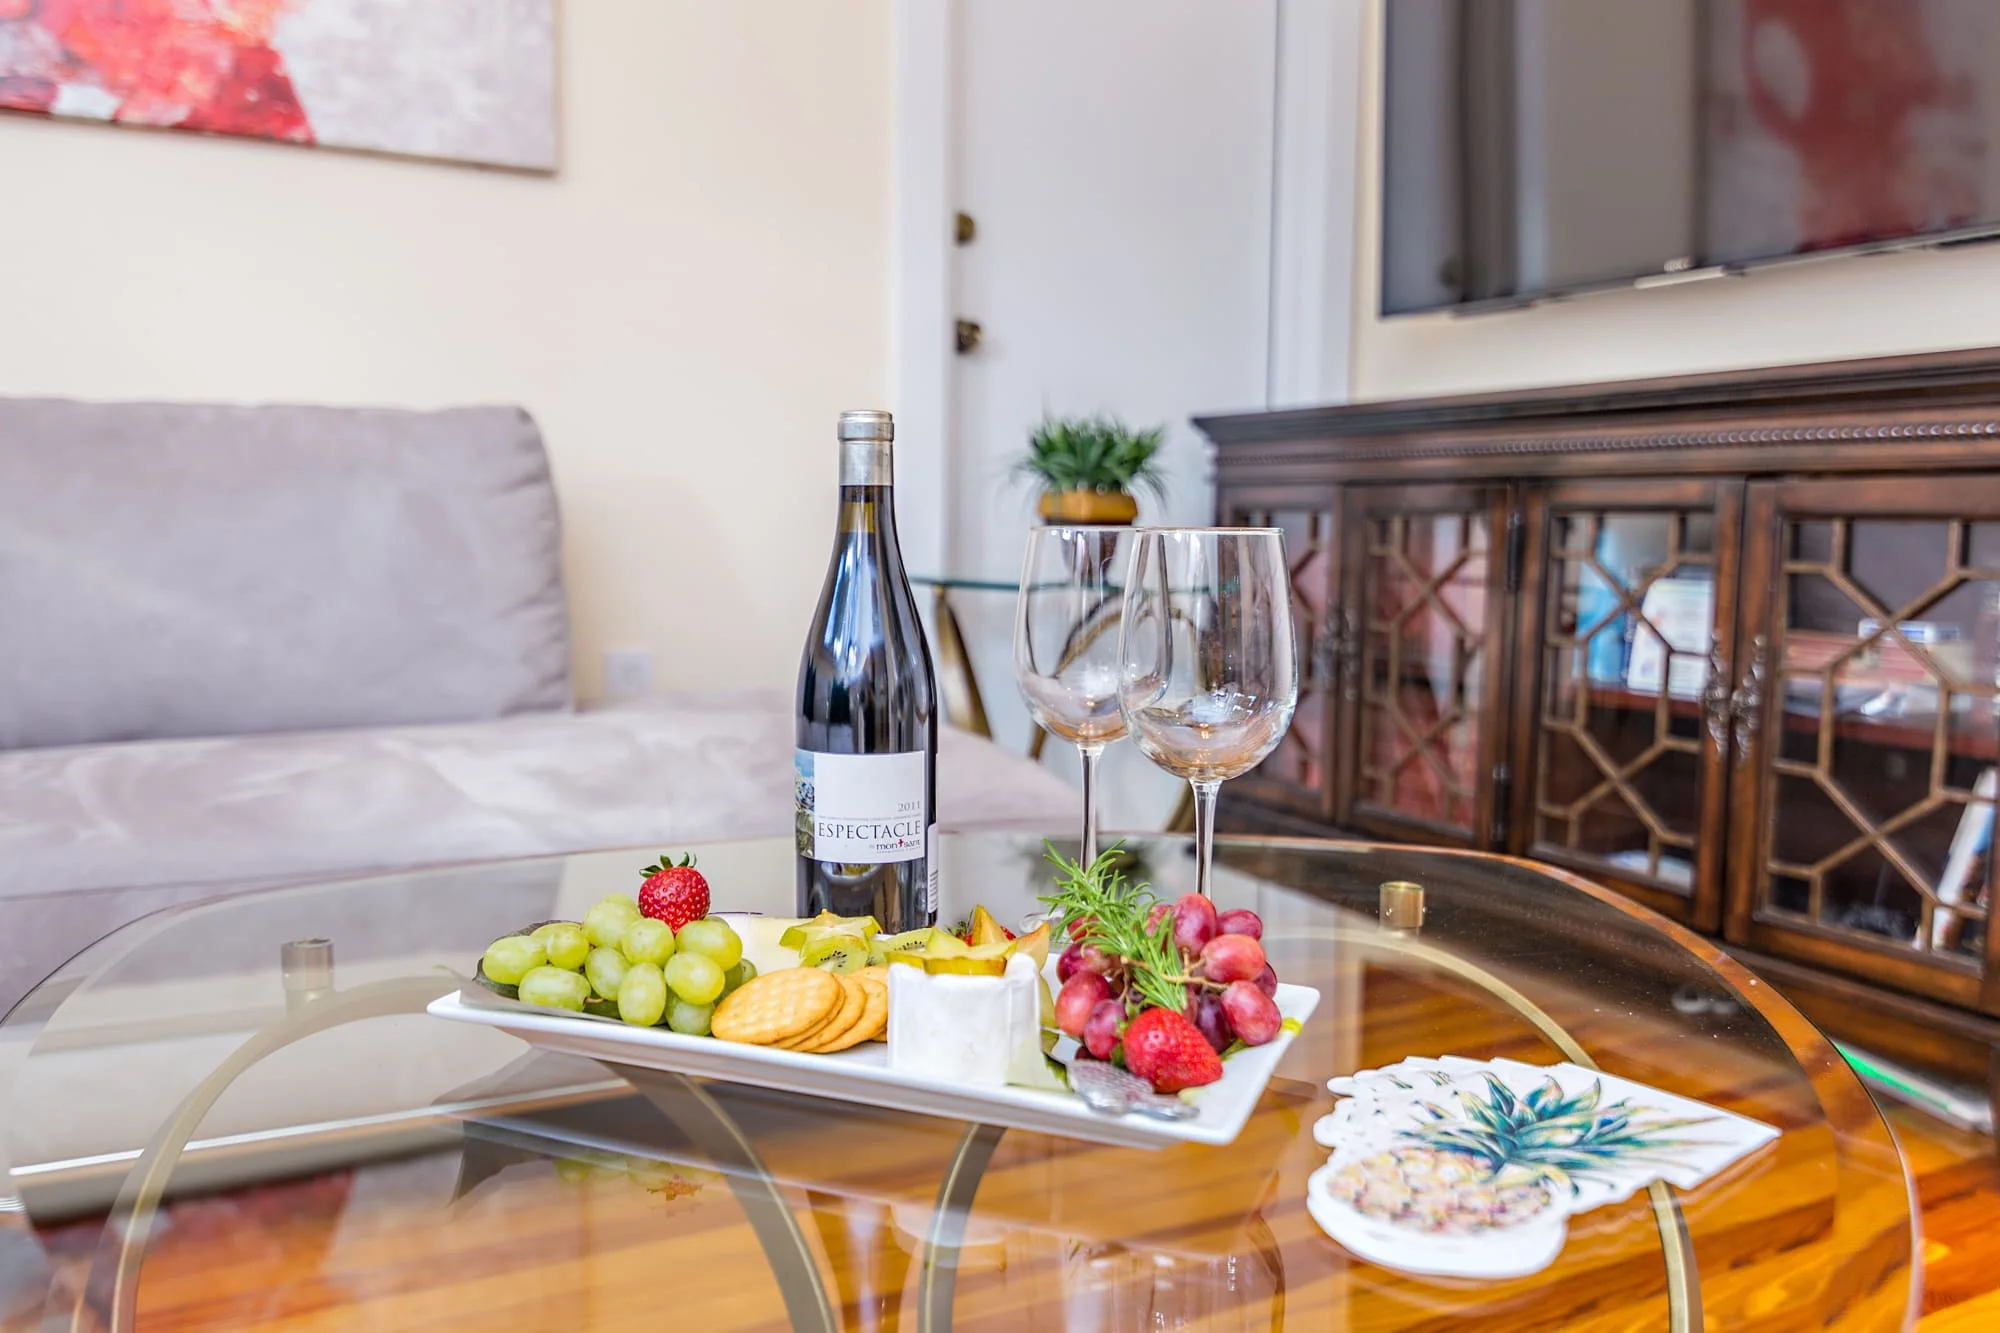 Image of Sundance South Suite private sitting area with Fruit and Cheese Tray, available for purchase